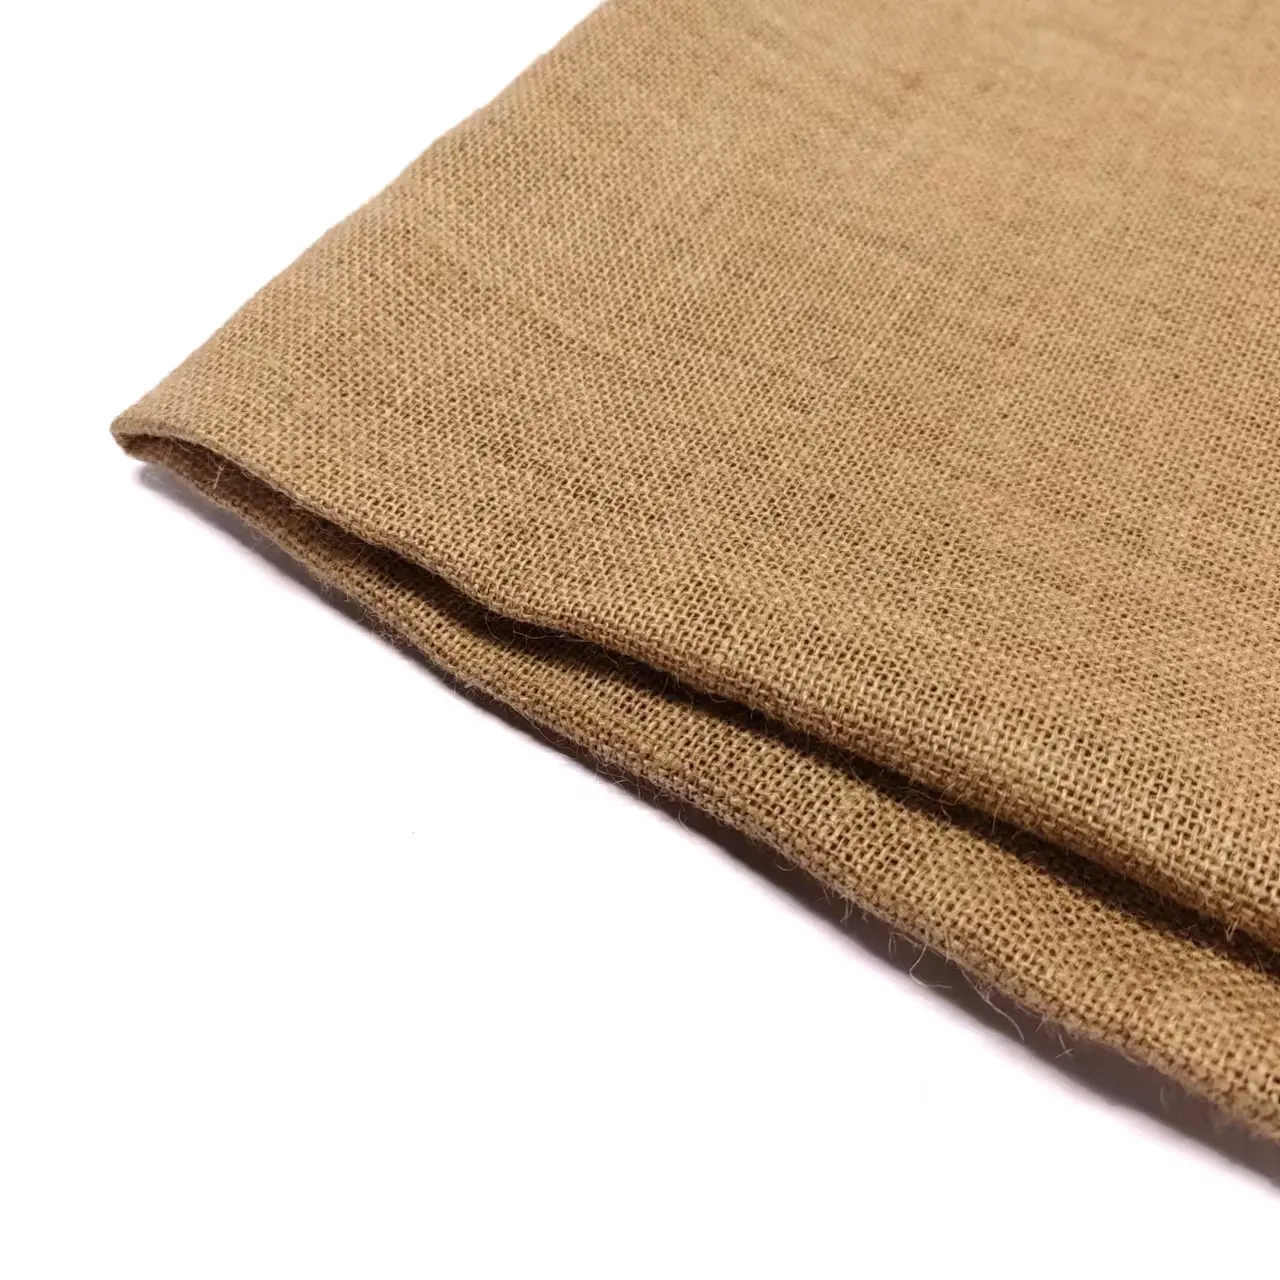 Hessian Fabric Roll 50cm/19.5 inches x 3m/10ft Natural 